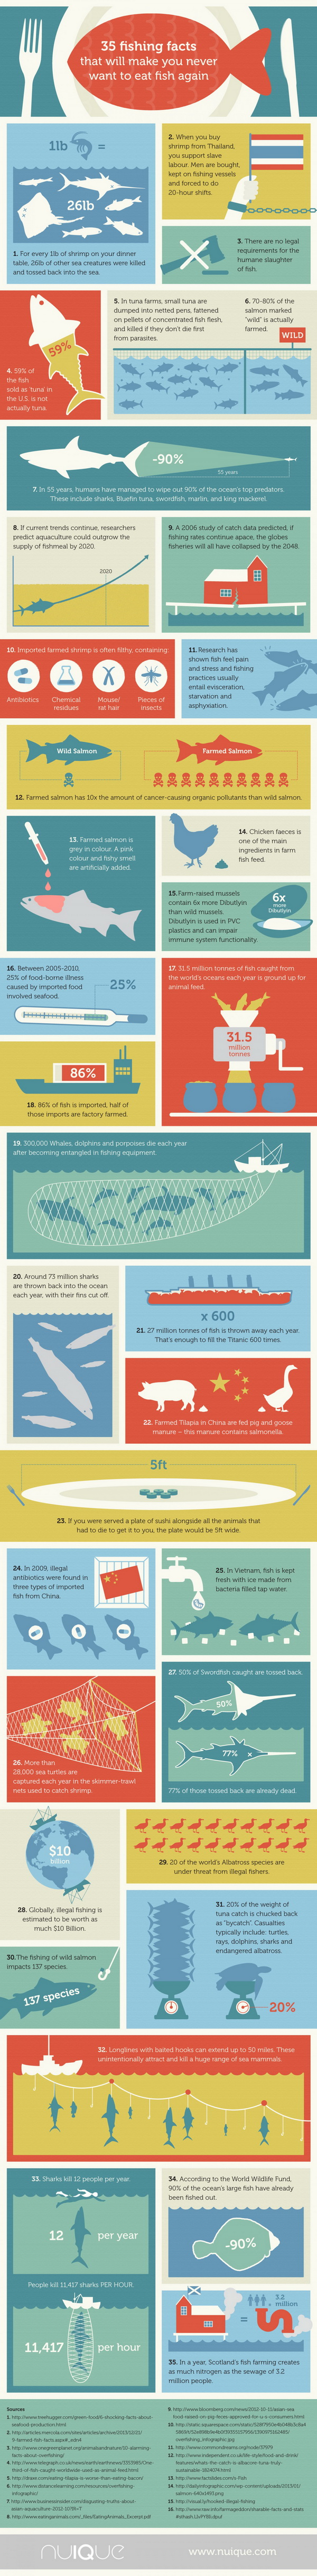 Infographic - 35-fish-facts-that-will-make-you-never-want-to-eat-fish-again